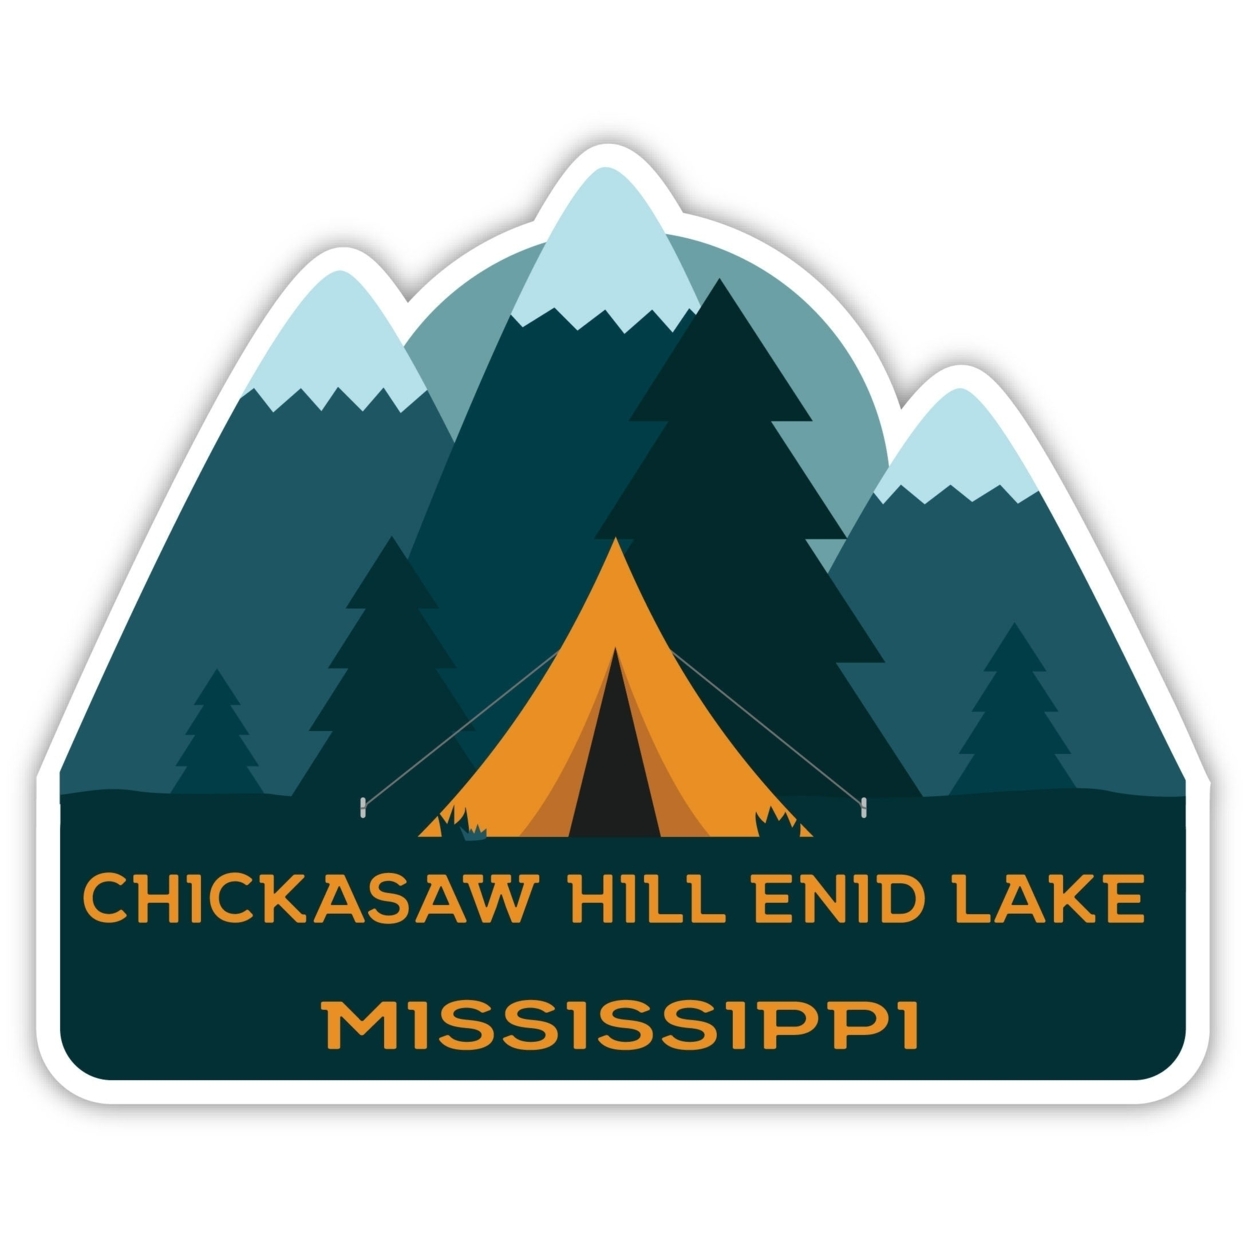 Chickasaw Hill Enid Lake Mississippi Souvenir Decorative Stickers (Choose Theme And Size) - 4-Pack, 10-Inch, Tent